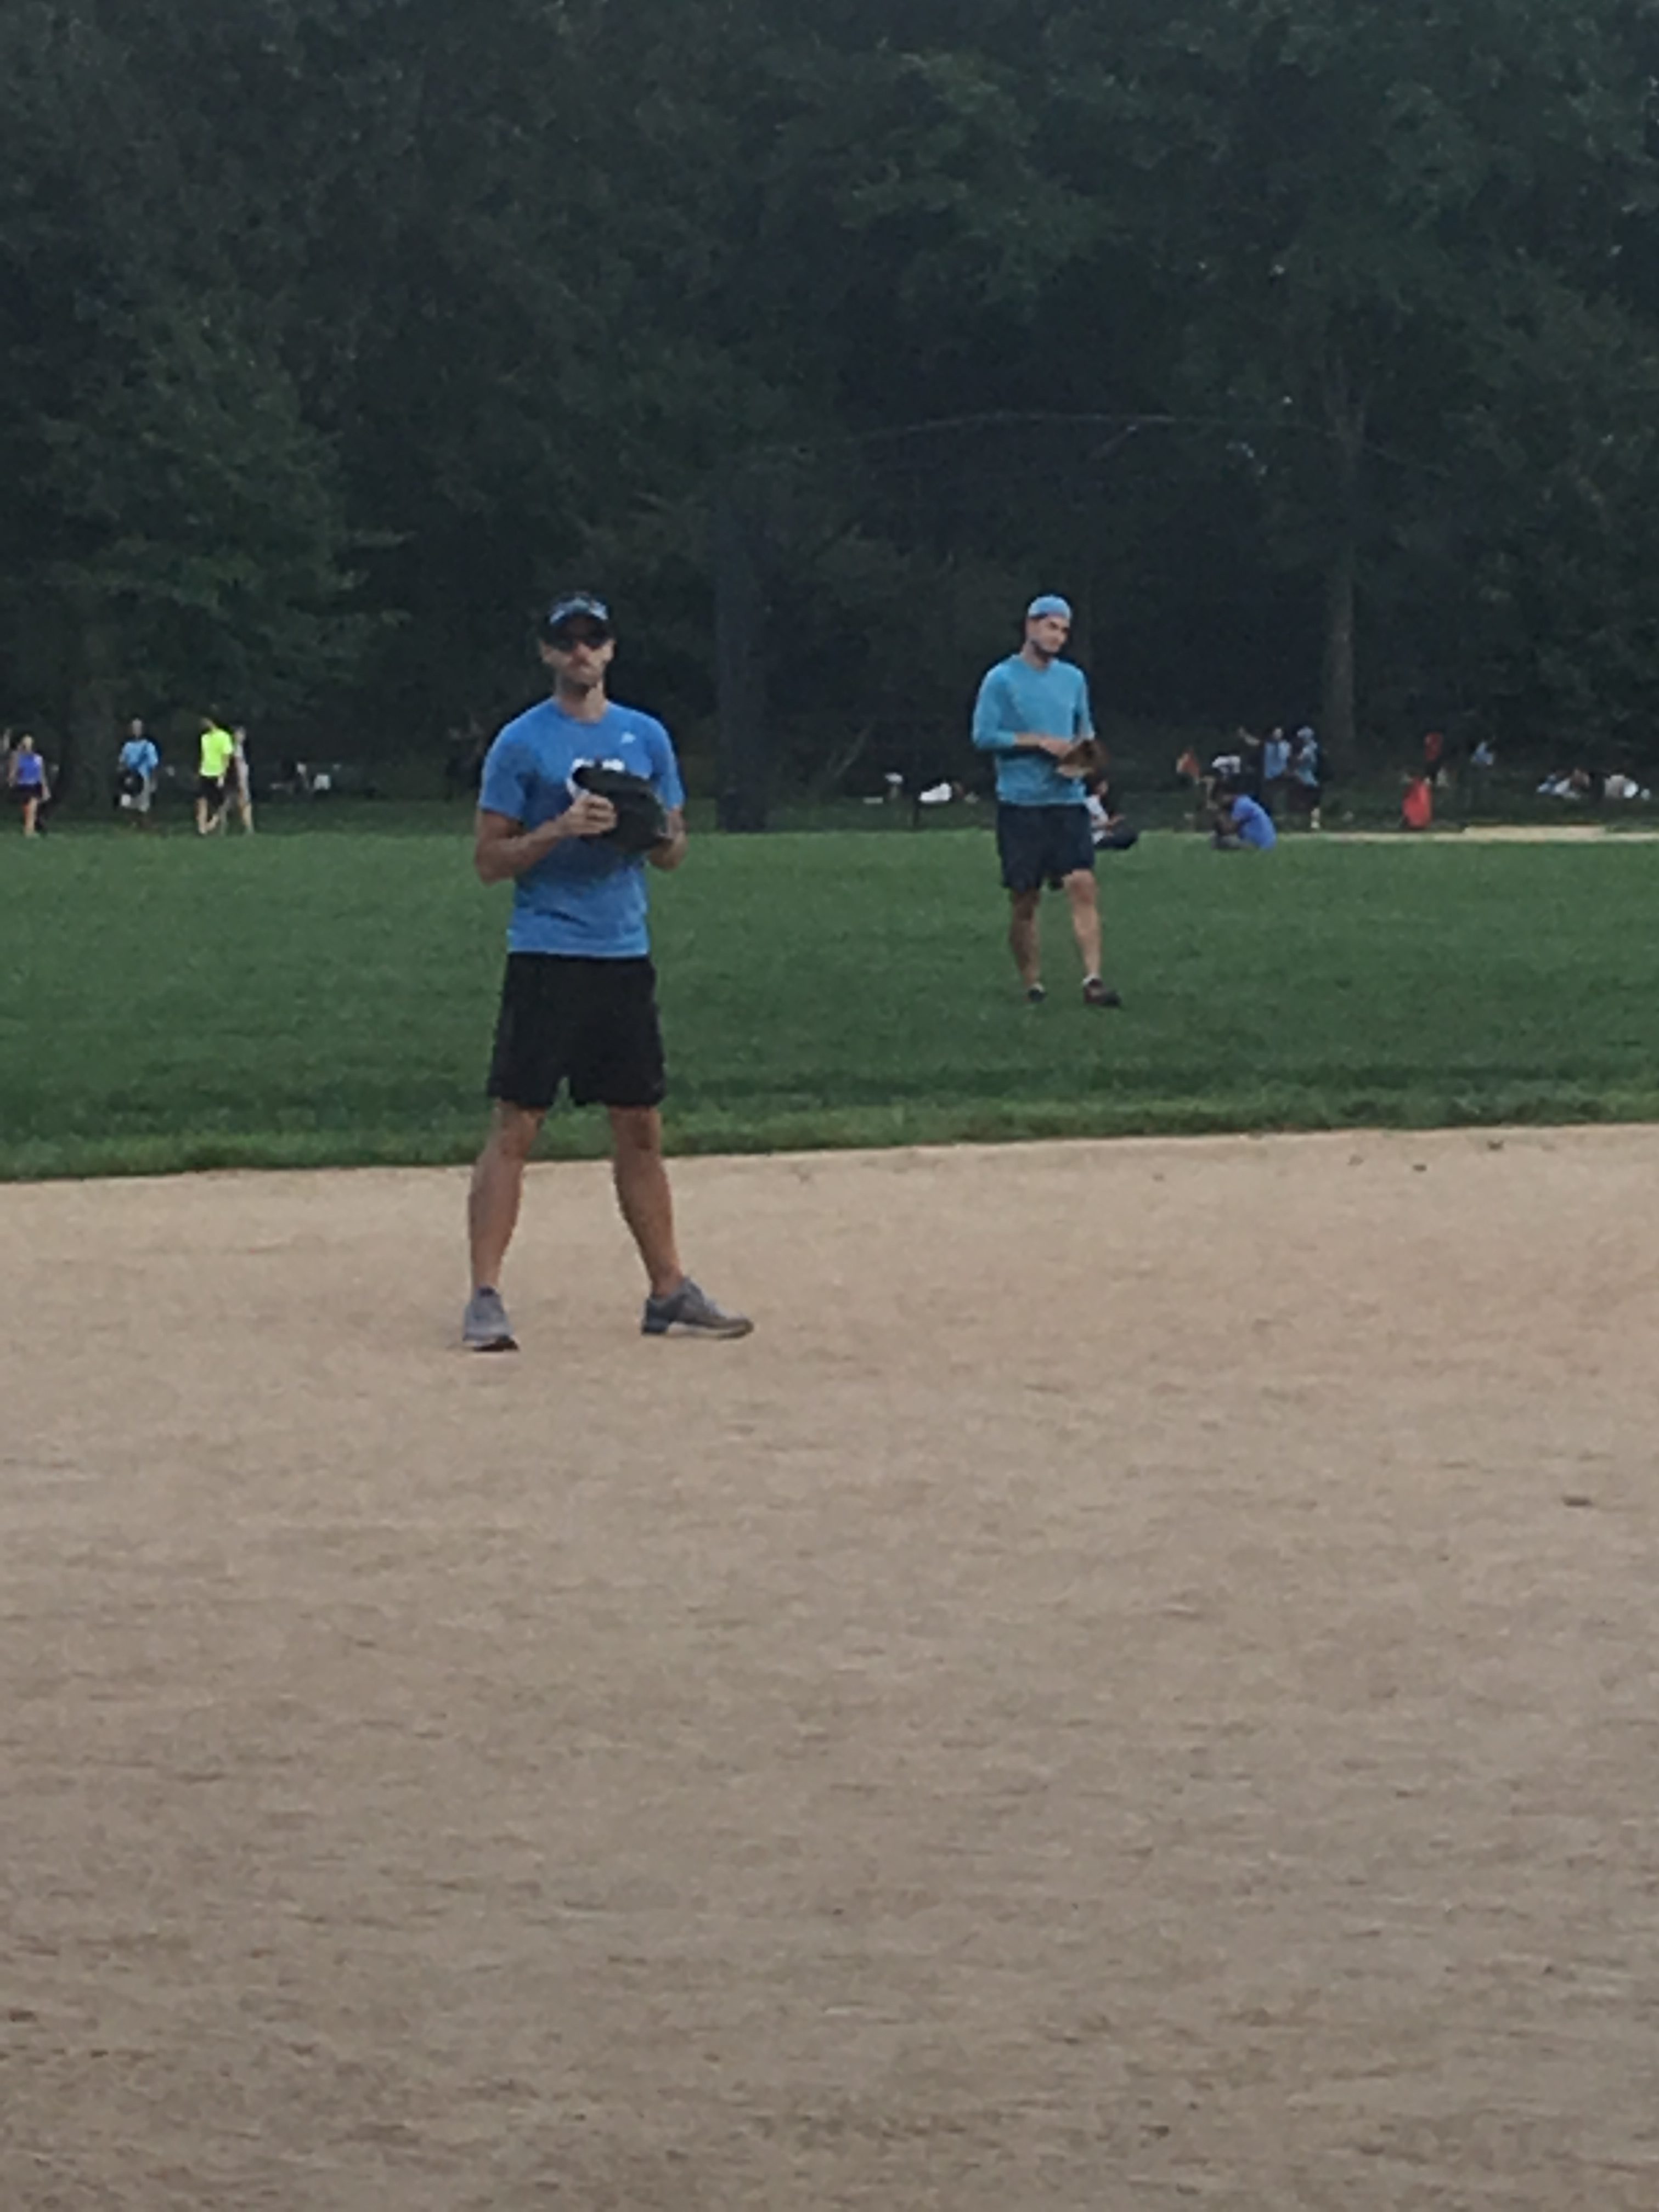 NYCC Summer Softball in Action - Batter up!